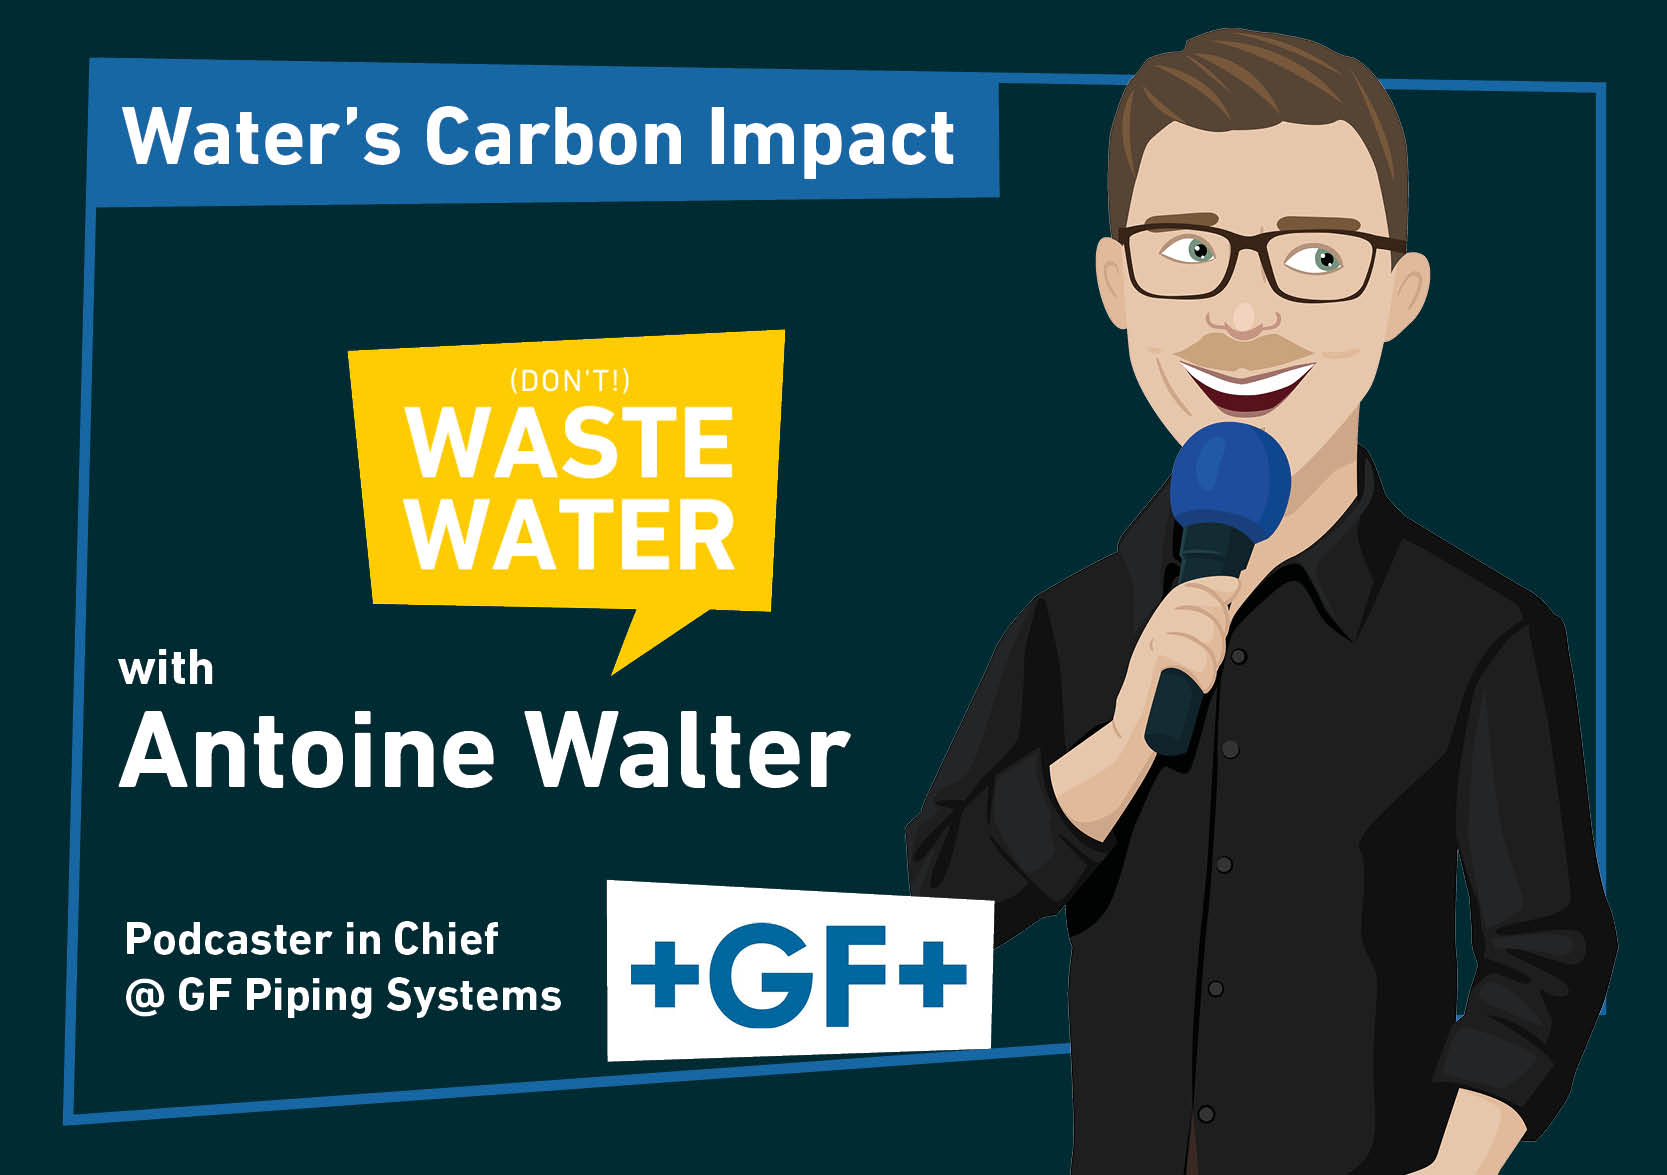 Featured - Water Technologies to Mitigate CO2 and Carbon Emissions